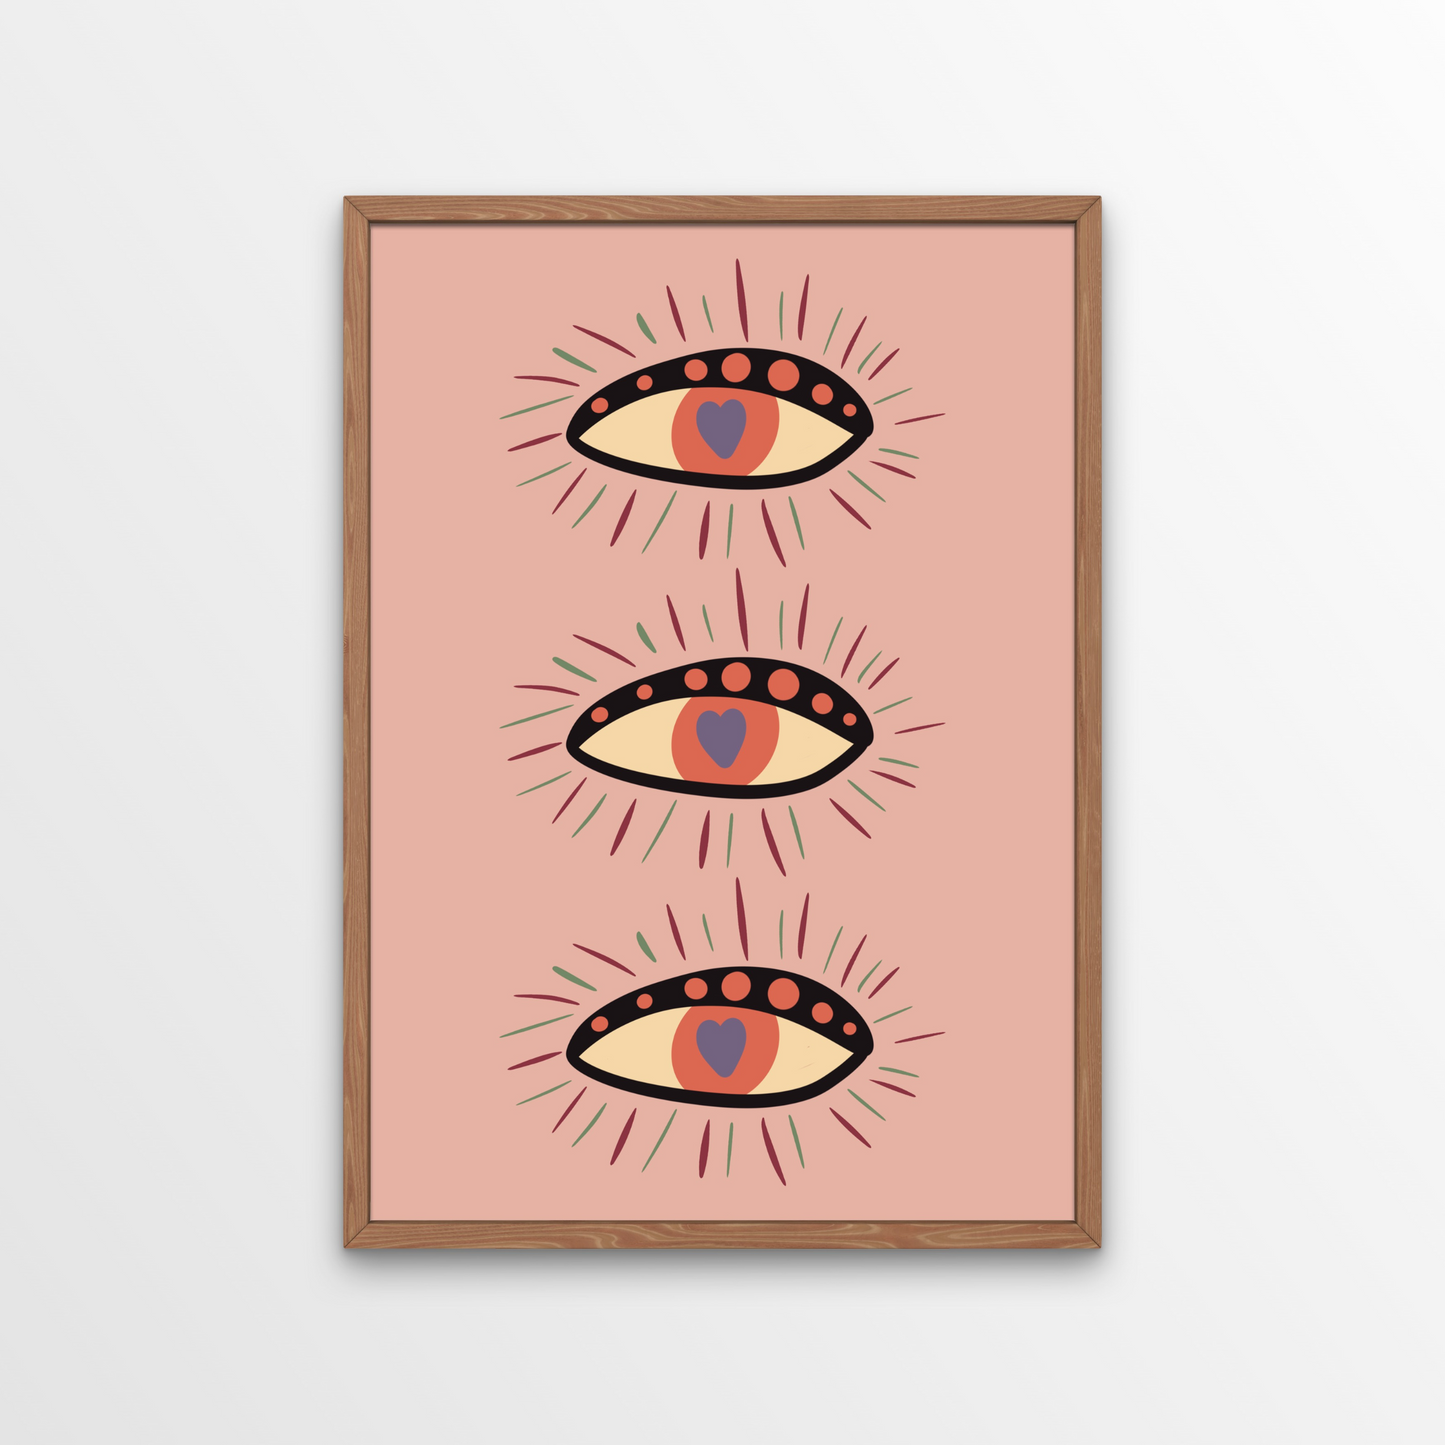 This Watching Eyes Art Print is the perfect addition to any room that could use a little extra magic. The three eyes on the neutral background make for a unique and beautiful print, and the Boho style adds a touch of whimsy. Get free shipping today on orders over £50